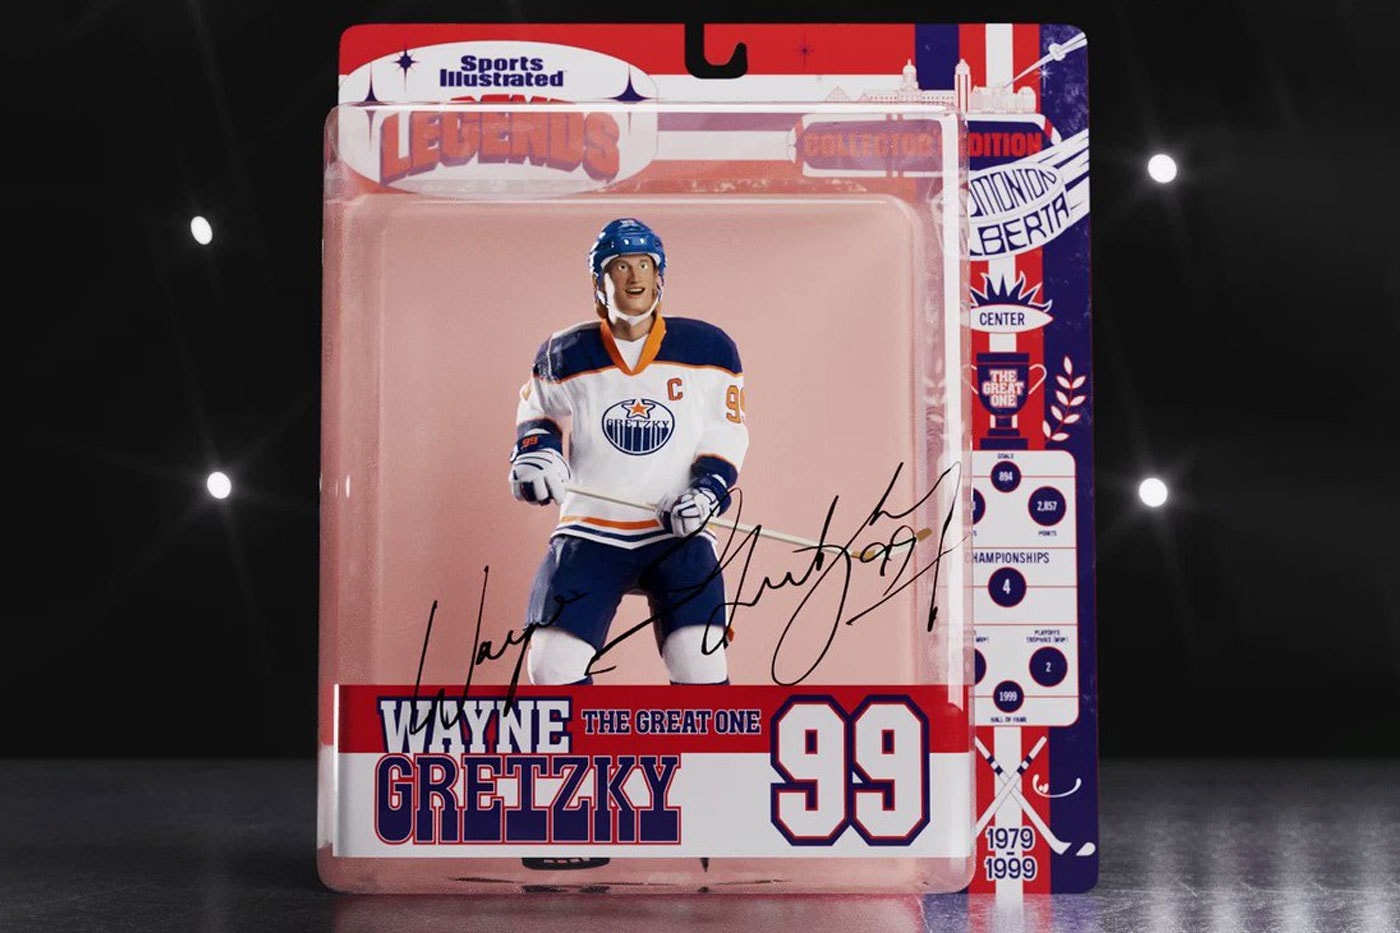 Ebay Sports illustrated Polygon Wayne Gretzky OneOf NFT NHL web3 green diamond legend rarity polygon crypto digital collectibles action figures trading release info date price news